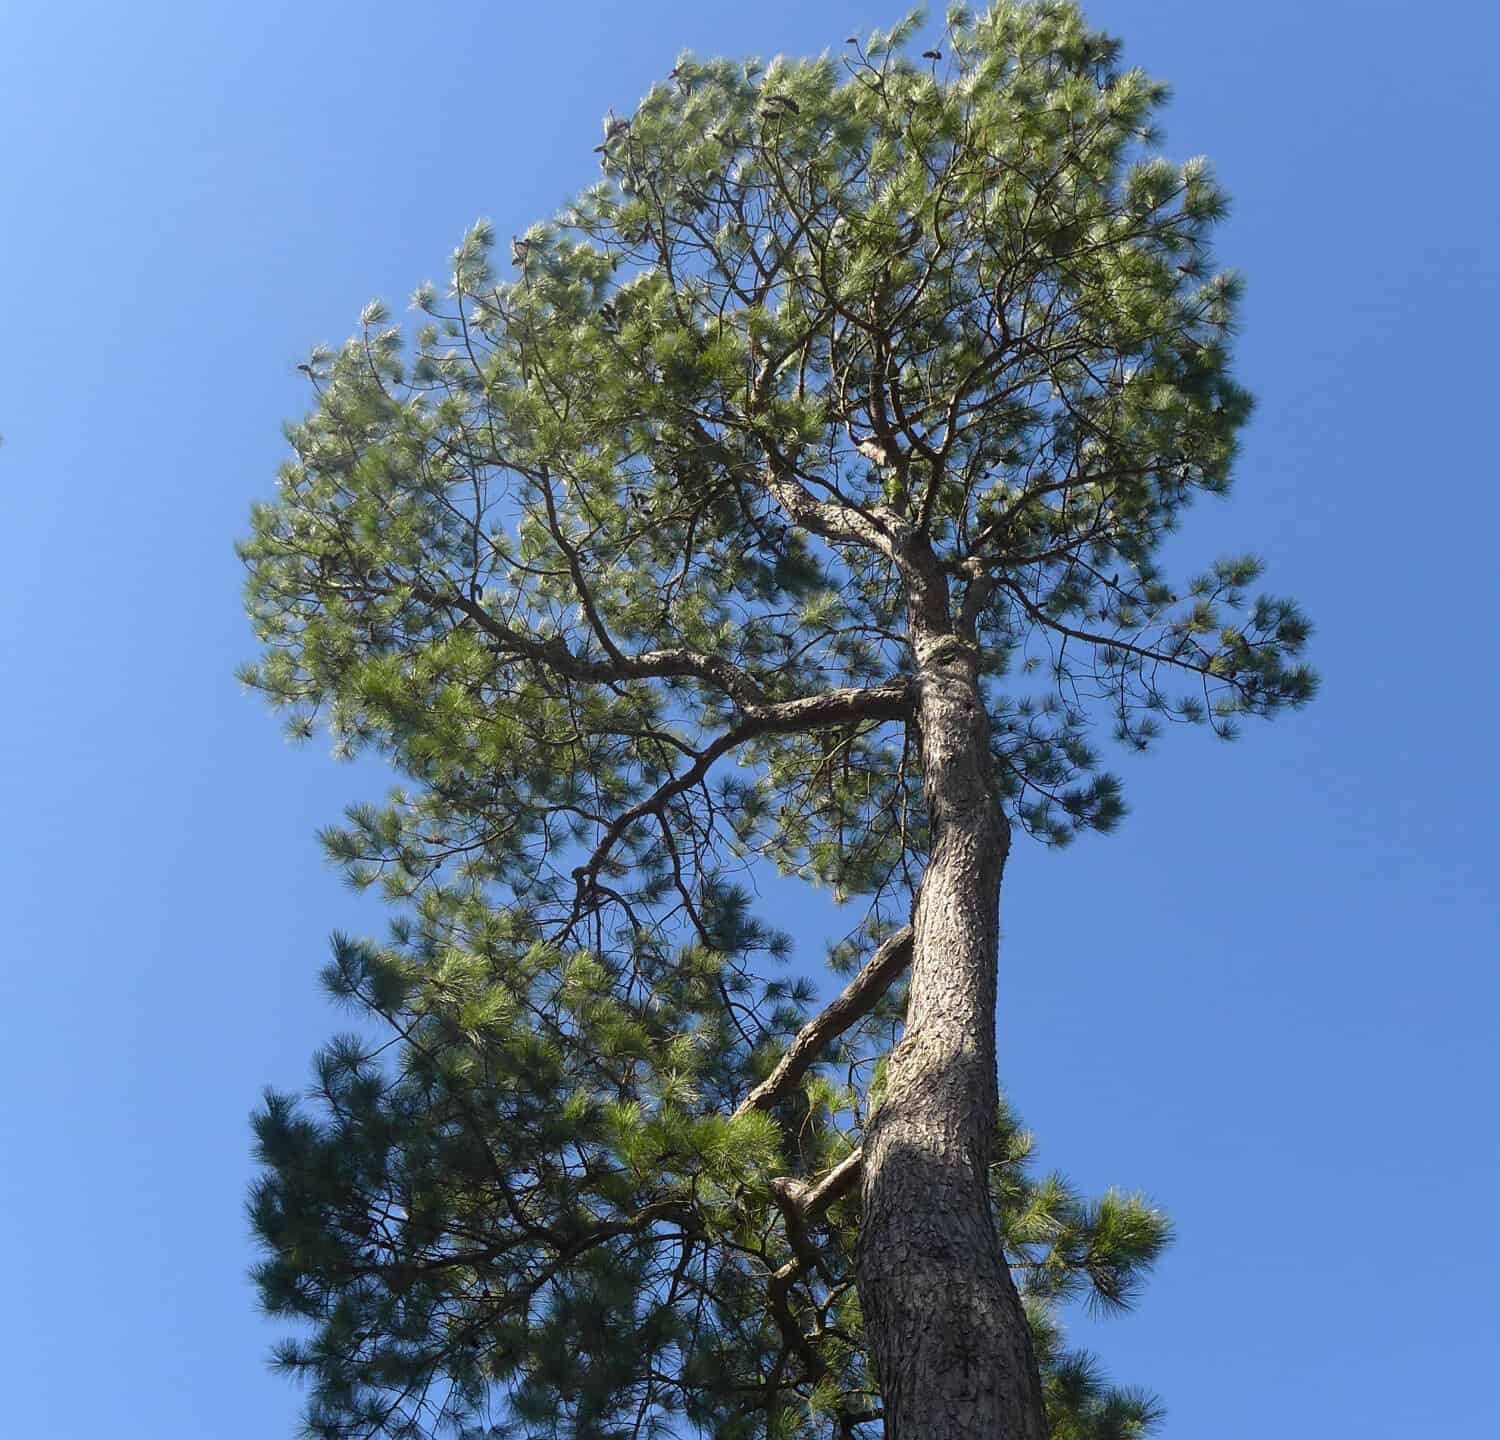 A striking low-angle view of the conifer Loblolly Pine, Pinus taeda from the Southeastern US against a blue sky